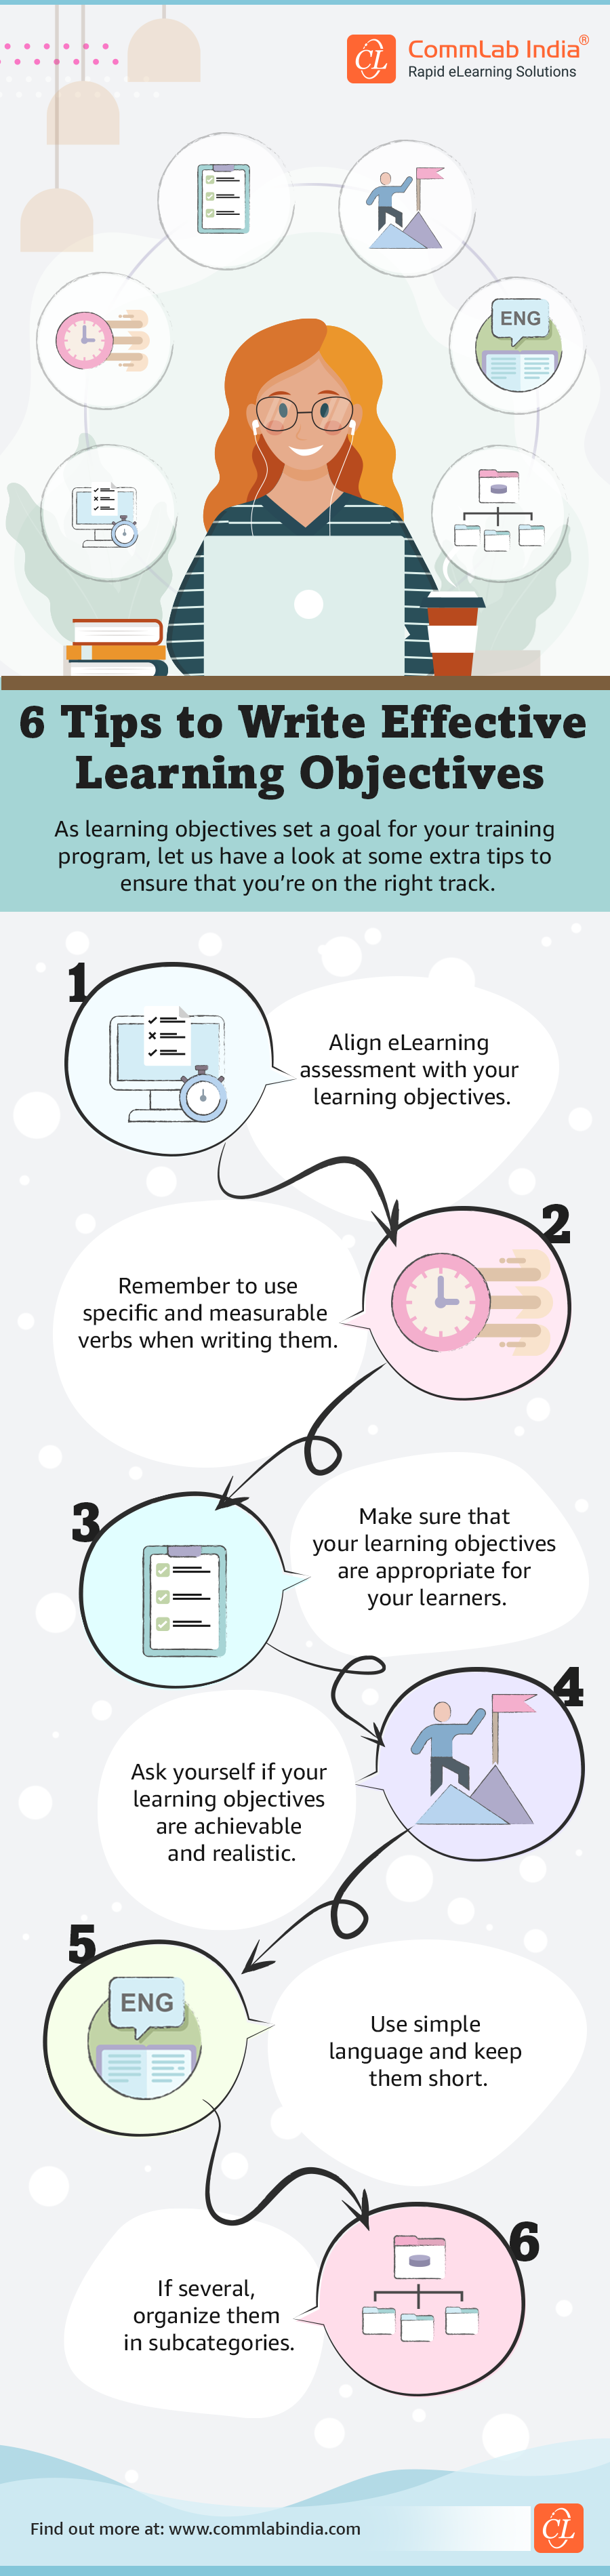 How to Write Effective Learning Objectives